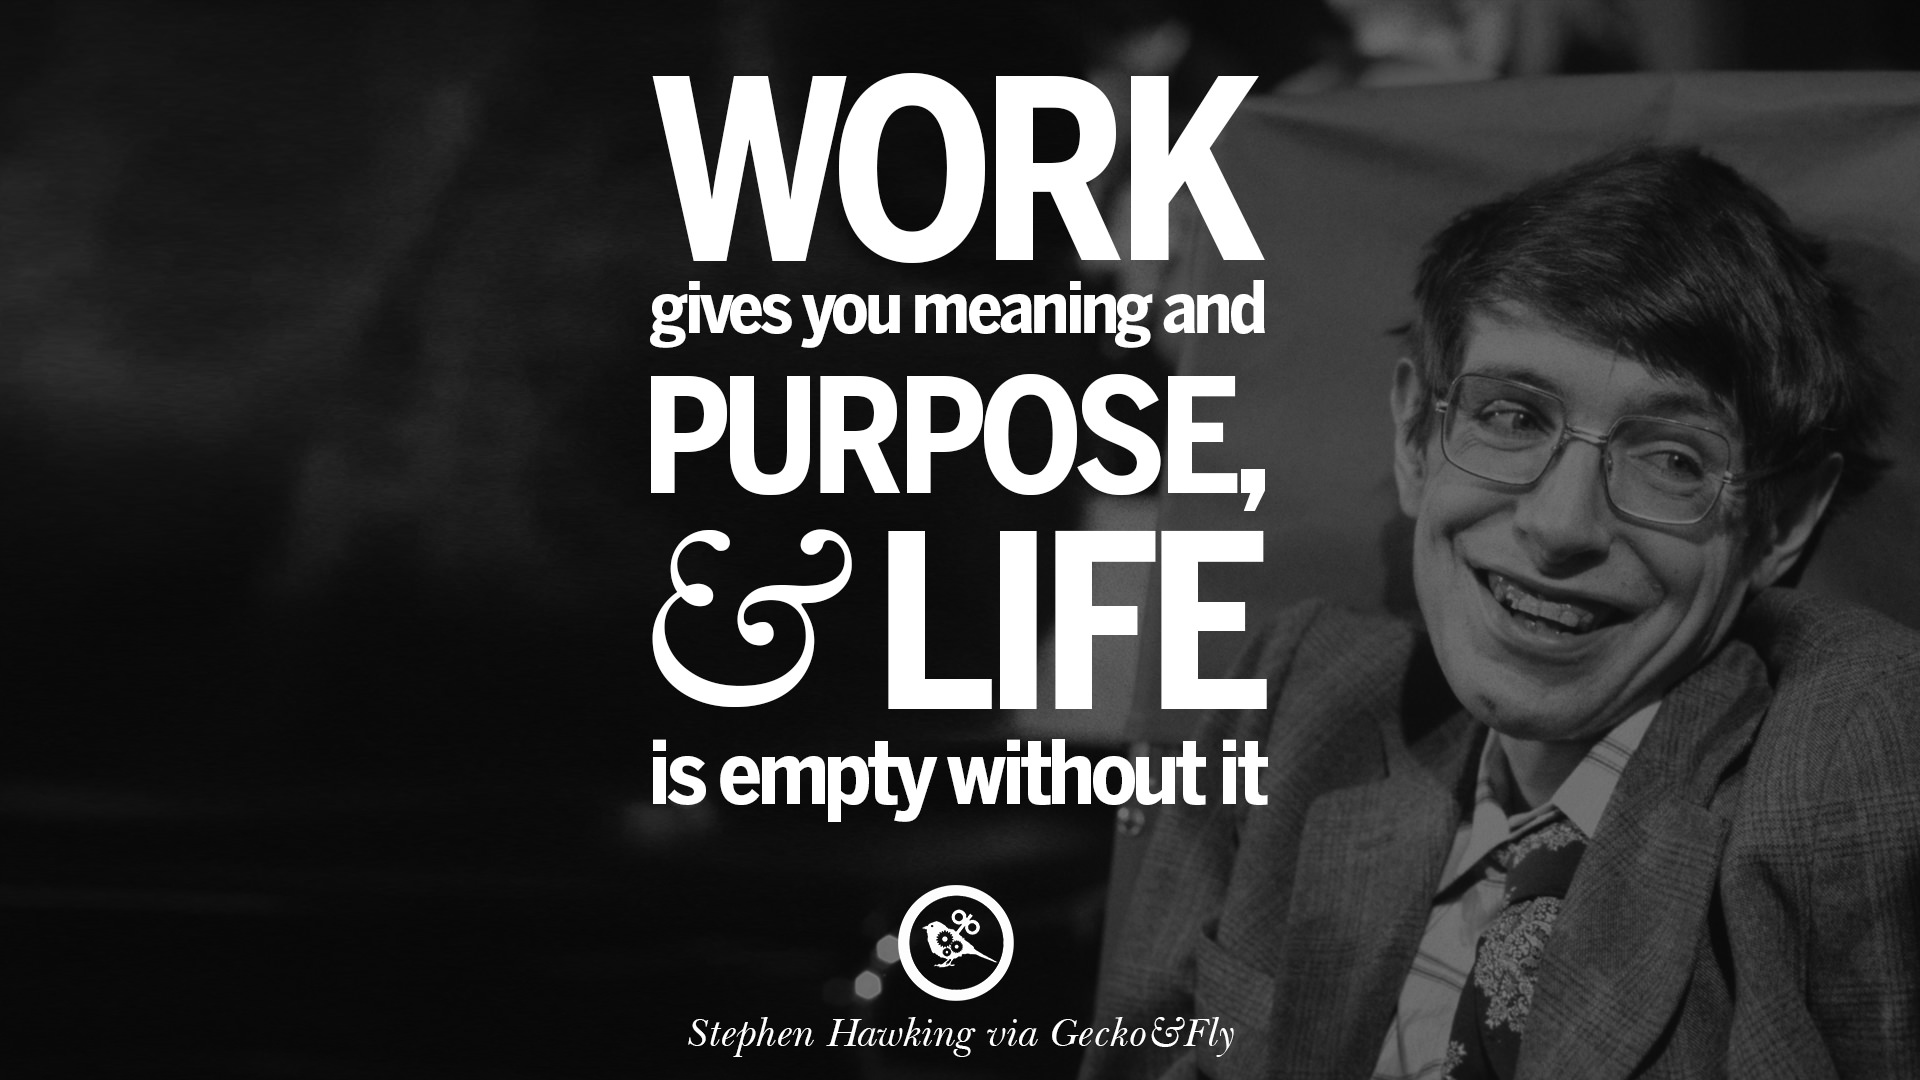 16 Quotes By Stephen Hawking On The Theory Of Everything From God To